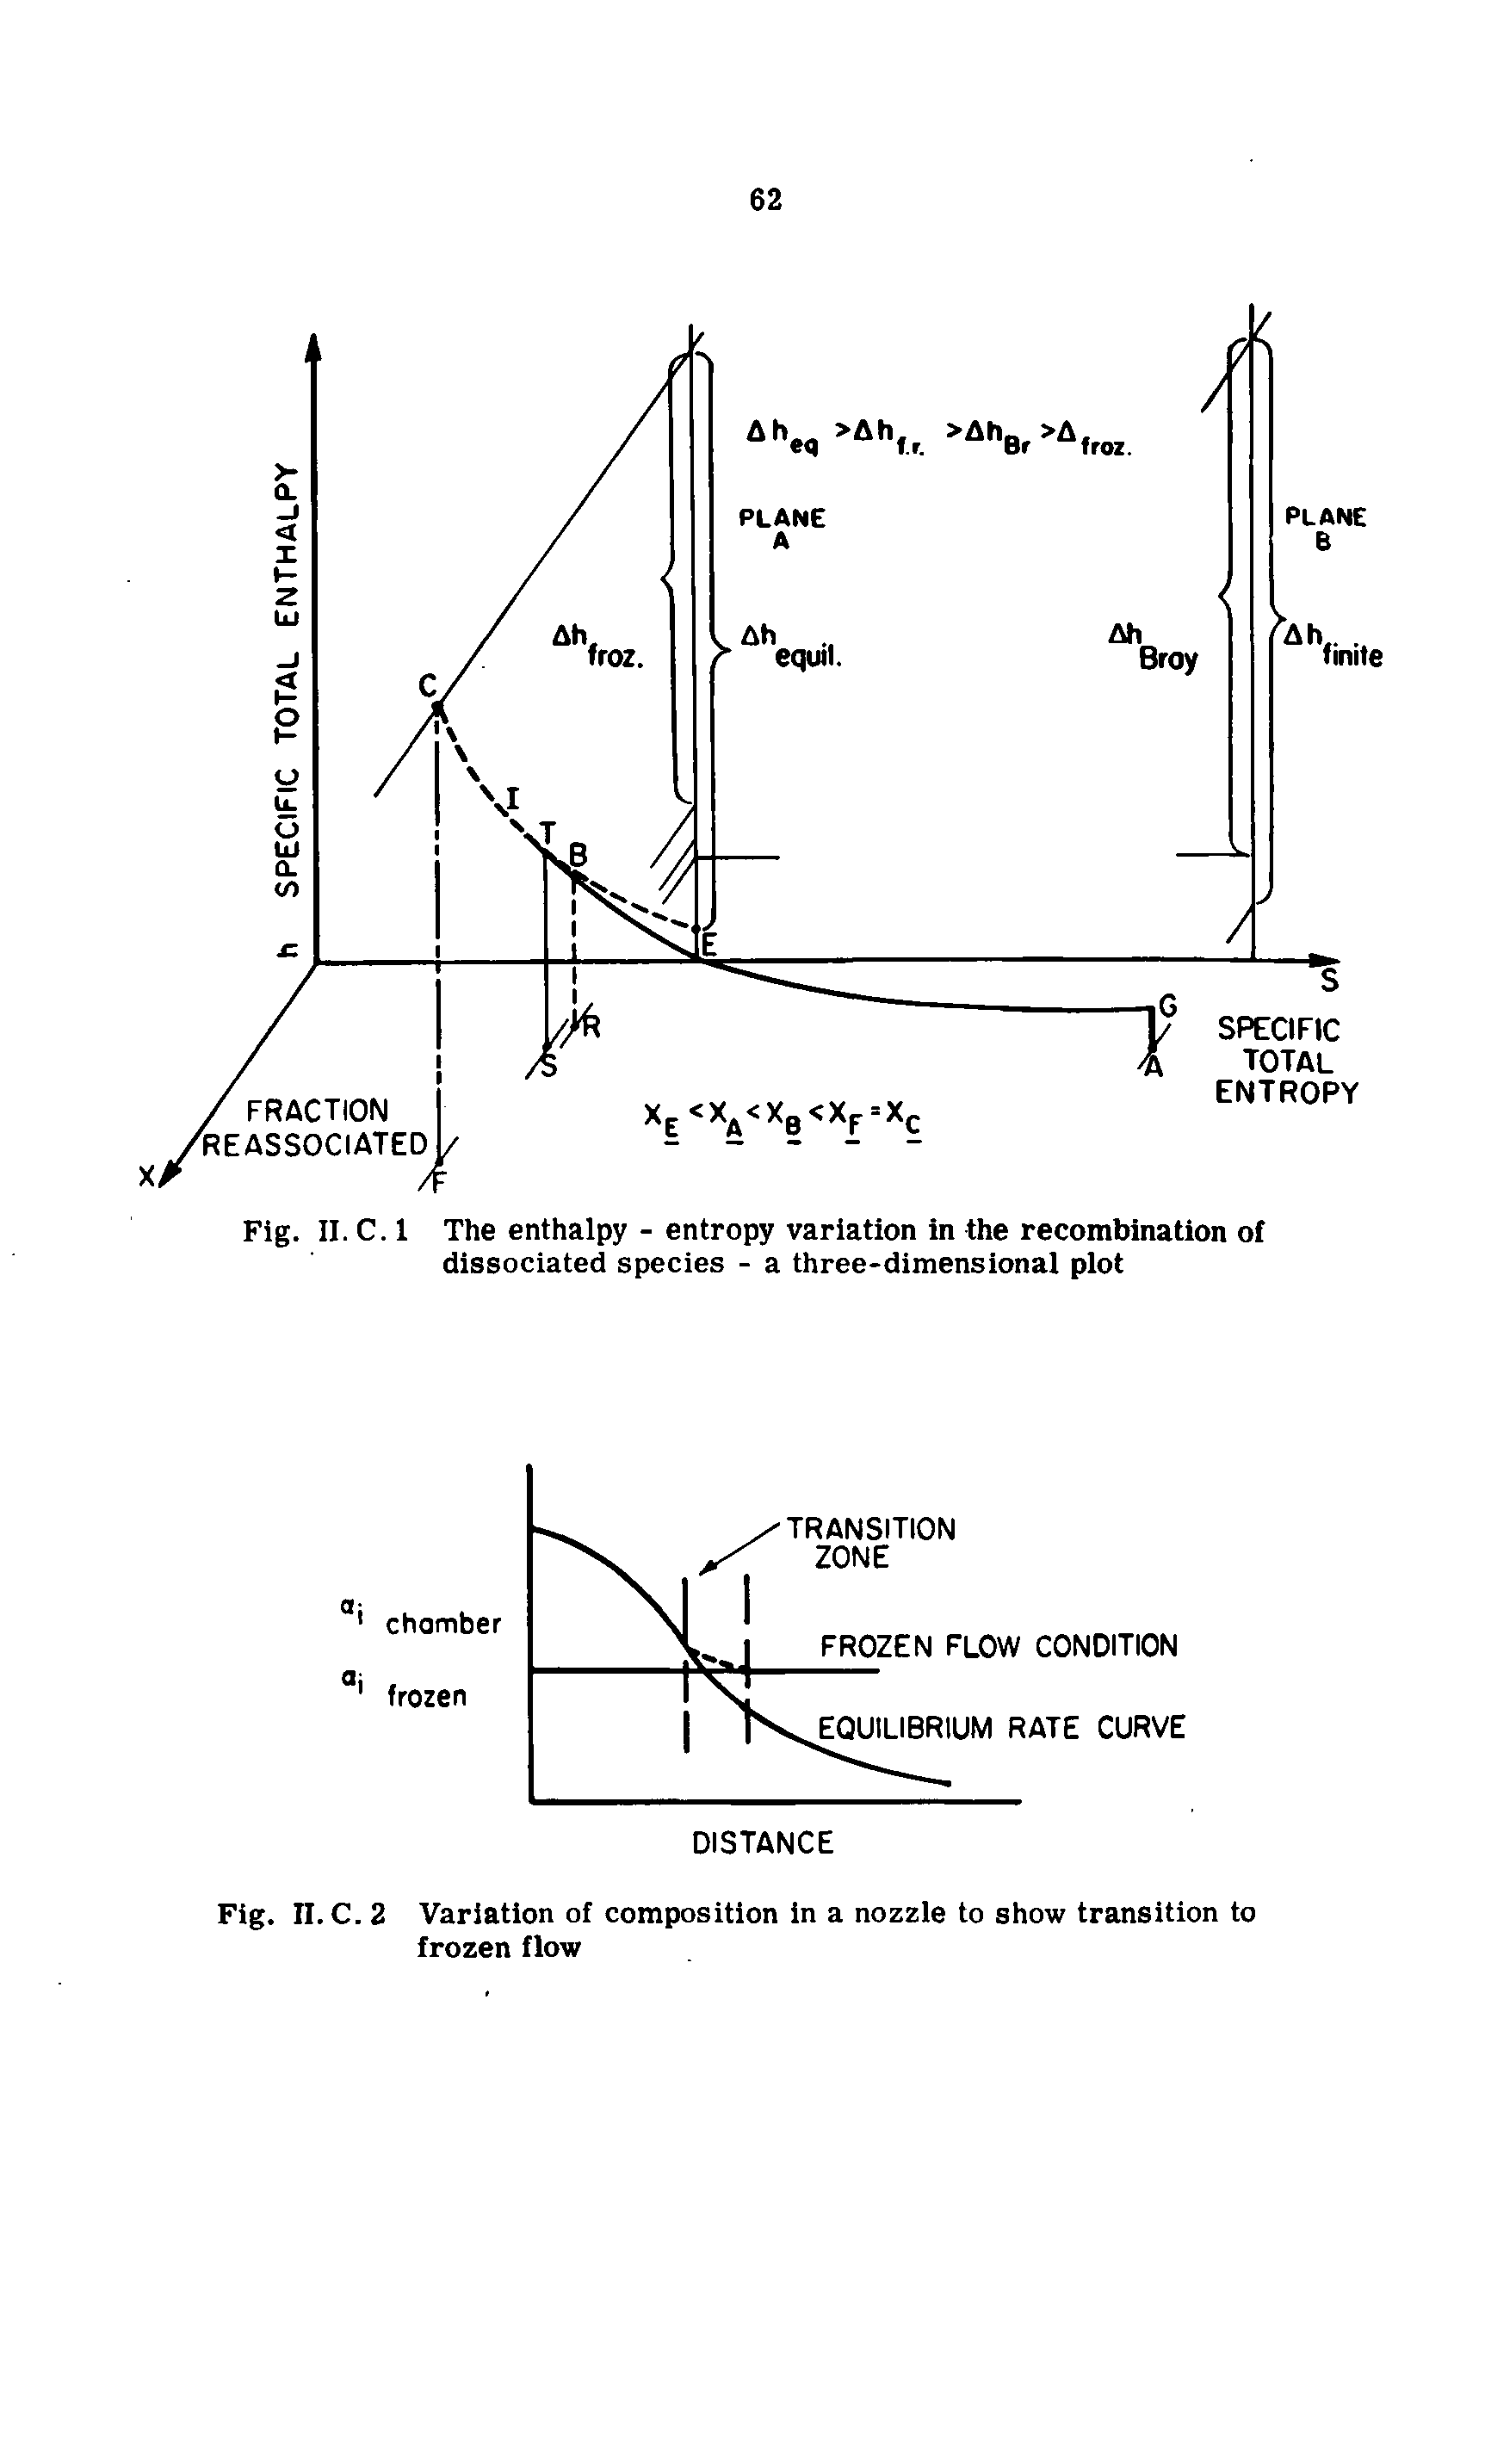 Fig. II. C. 2 Variation of composition in a nozzle to show transition to frozen flow...